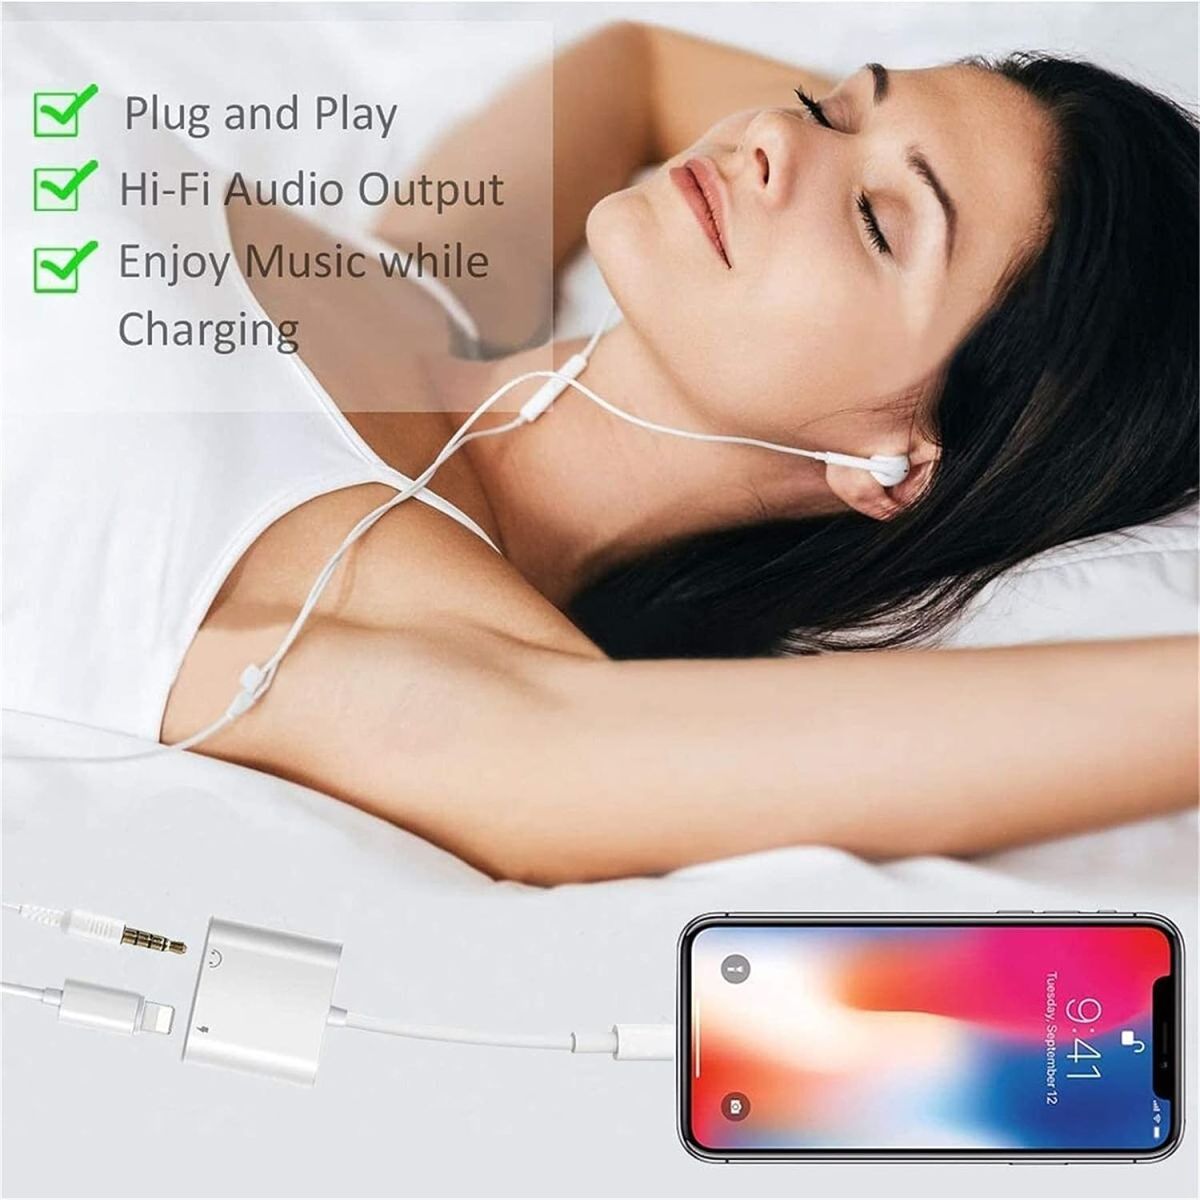 [2 Pack] Headphone Adapter for iPhone 2 in 1 Lightning to 3.5mm AUX Audio Dongle [Apple MFi Certified] Charger Splitter for iPhone Accessories Compatible iPhone 14/13/12/11/X/8/iPad Support iOS System